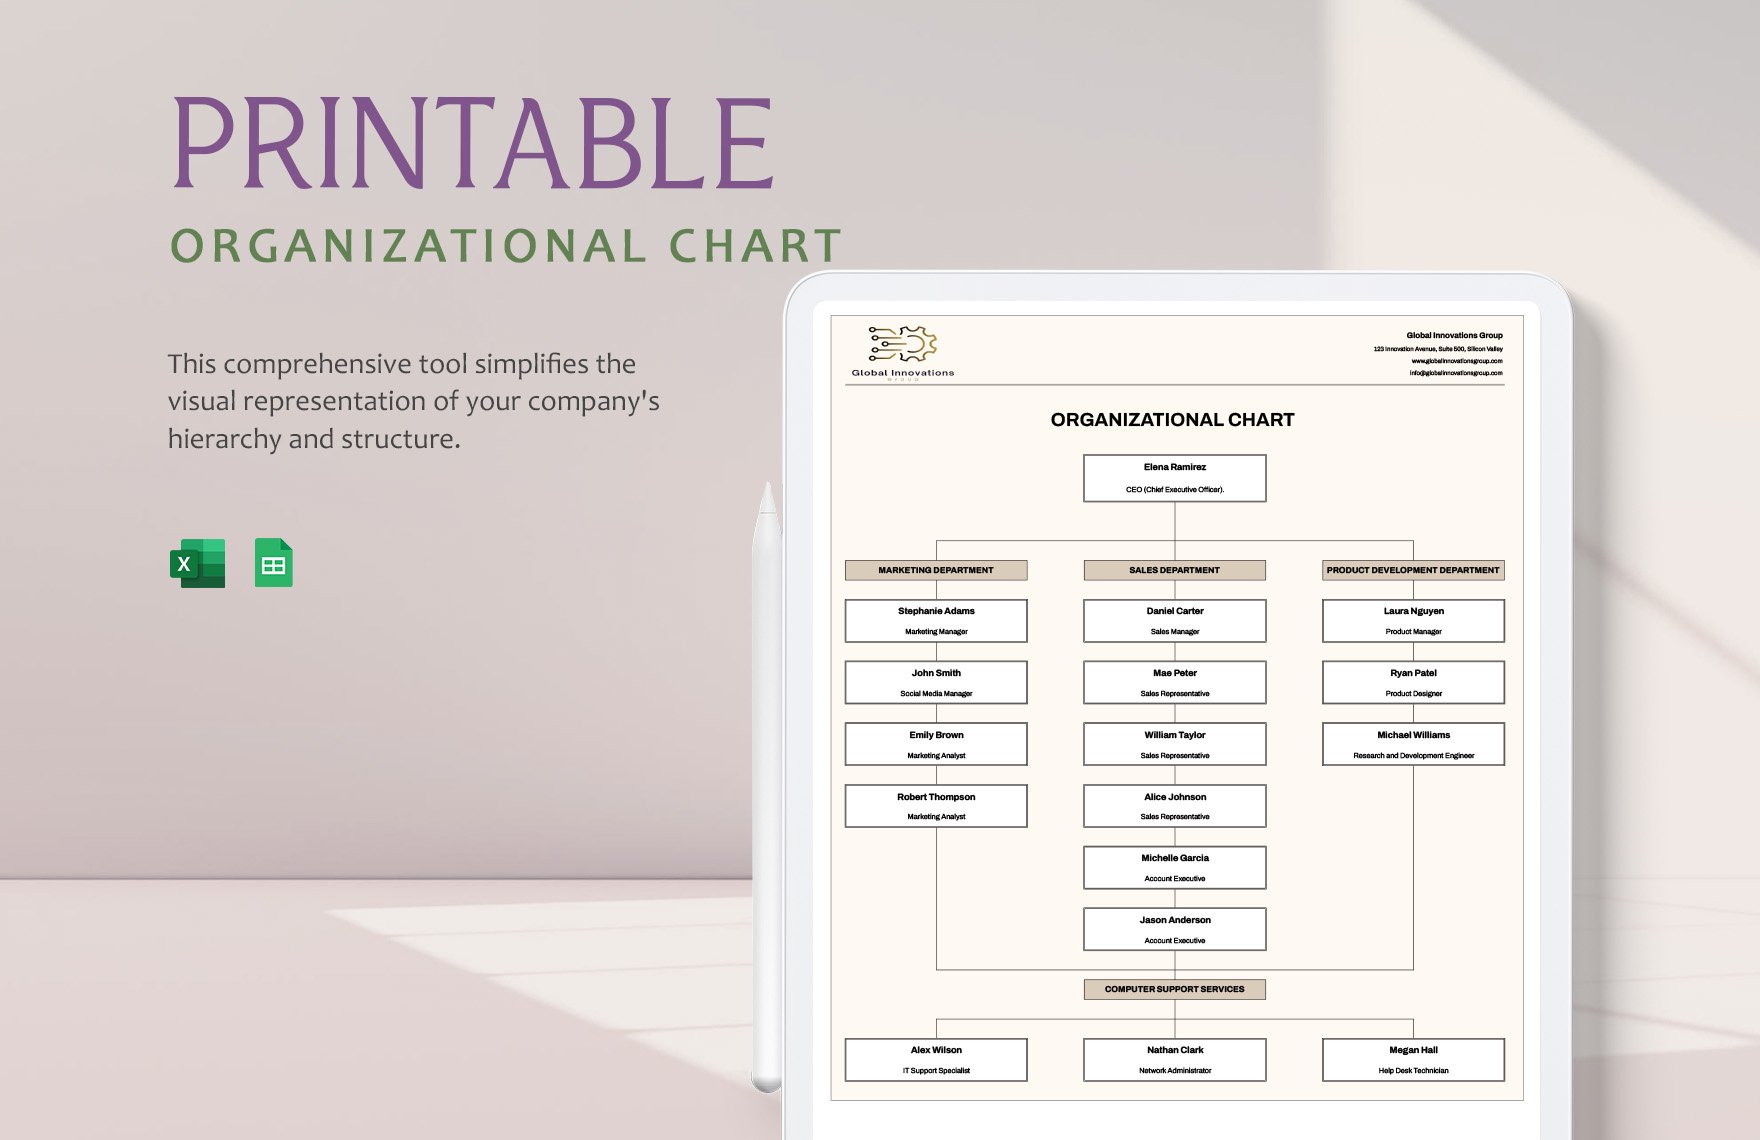 Printable Organizational Chart Template in Excel, Google Sheets